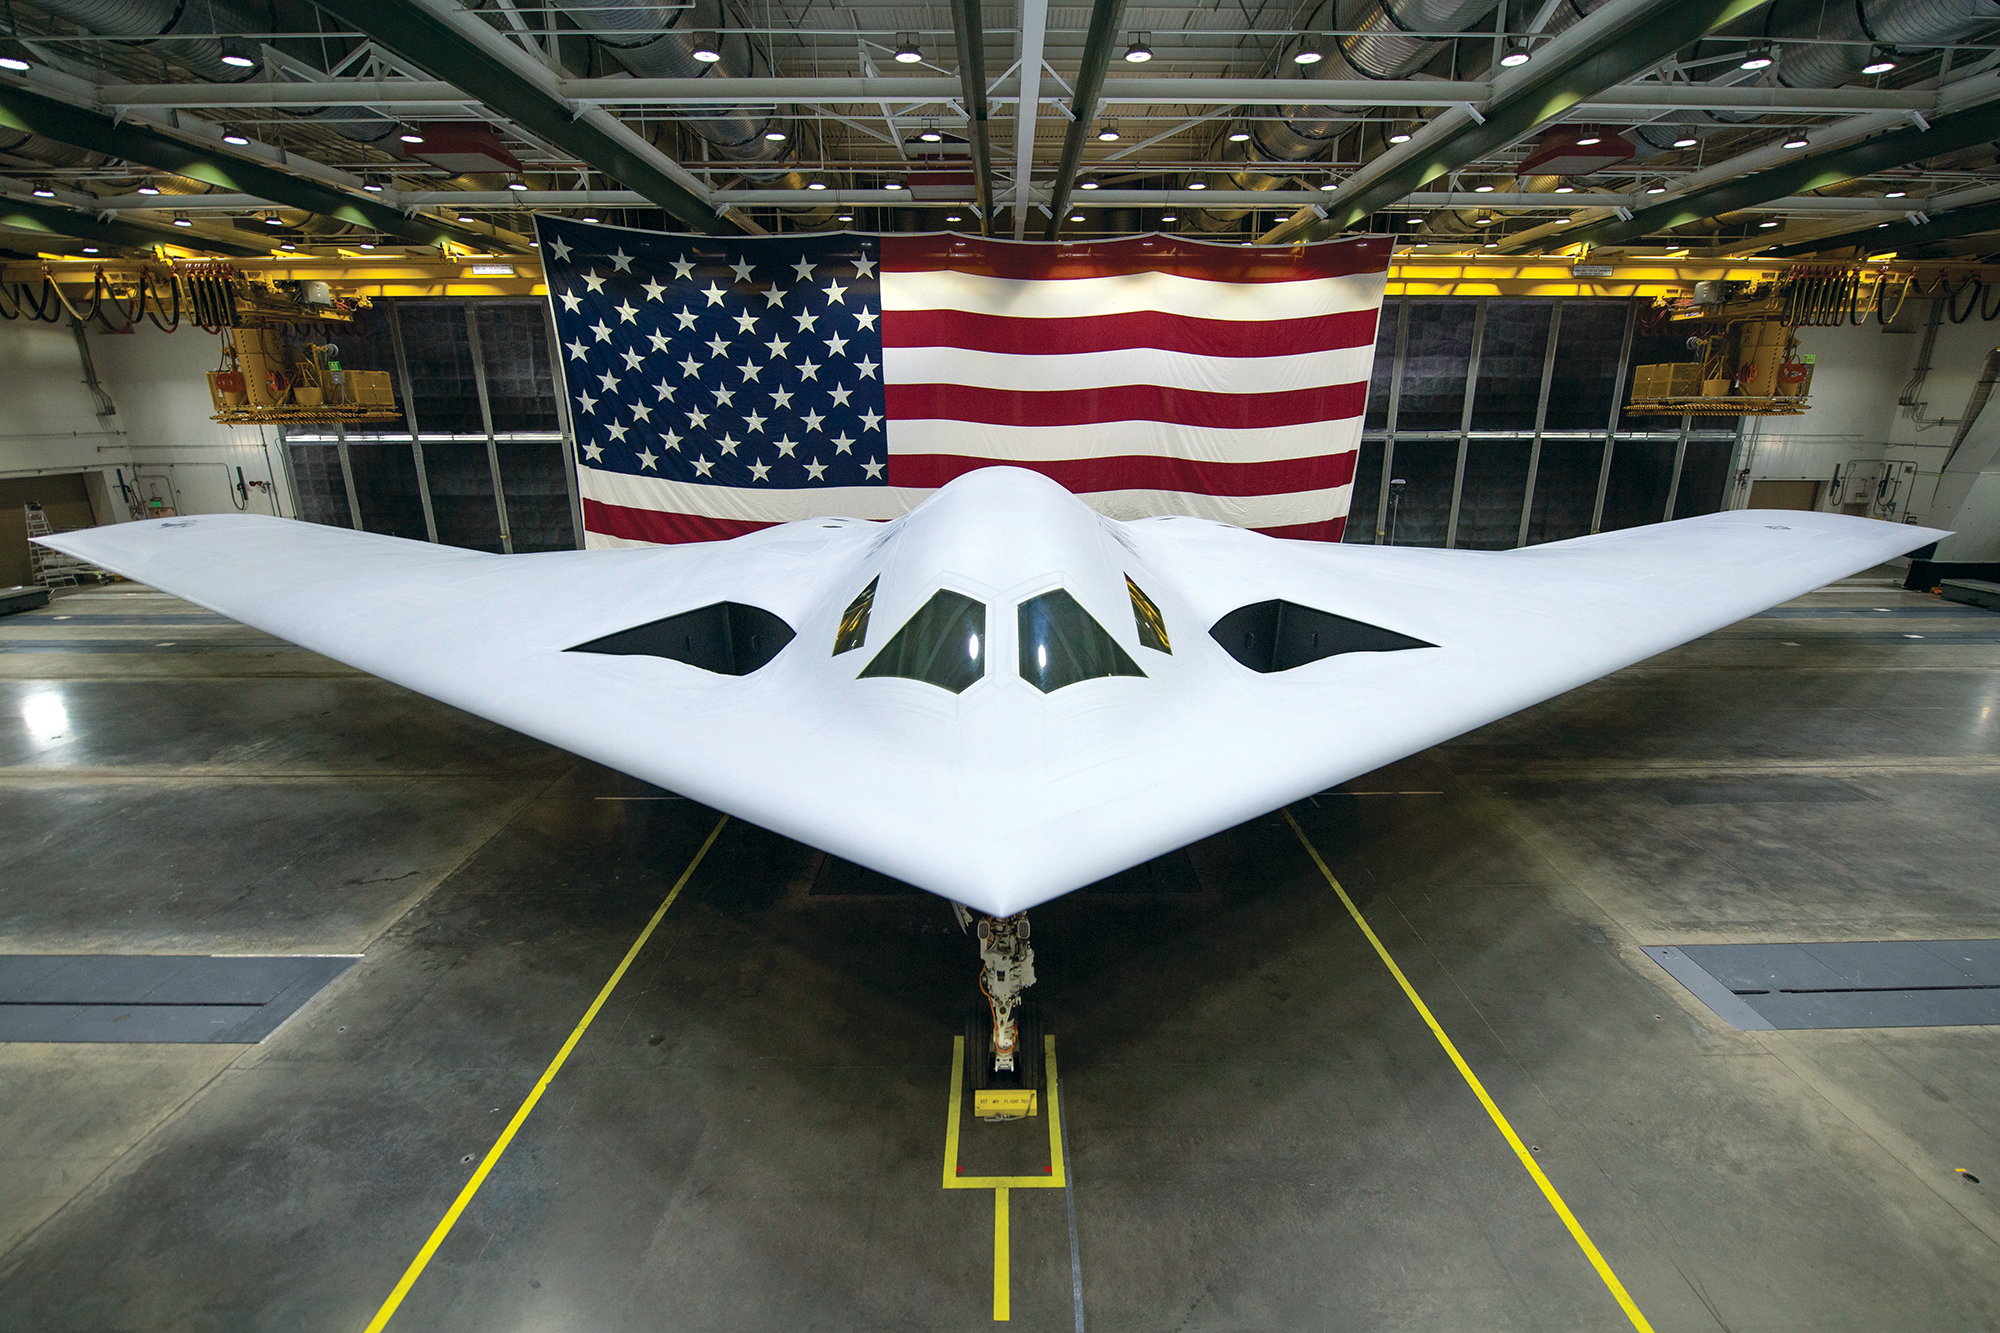 Air Force Programs Boss: No Need to Decide on More than 100 B-21s for at Least a Decade